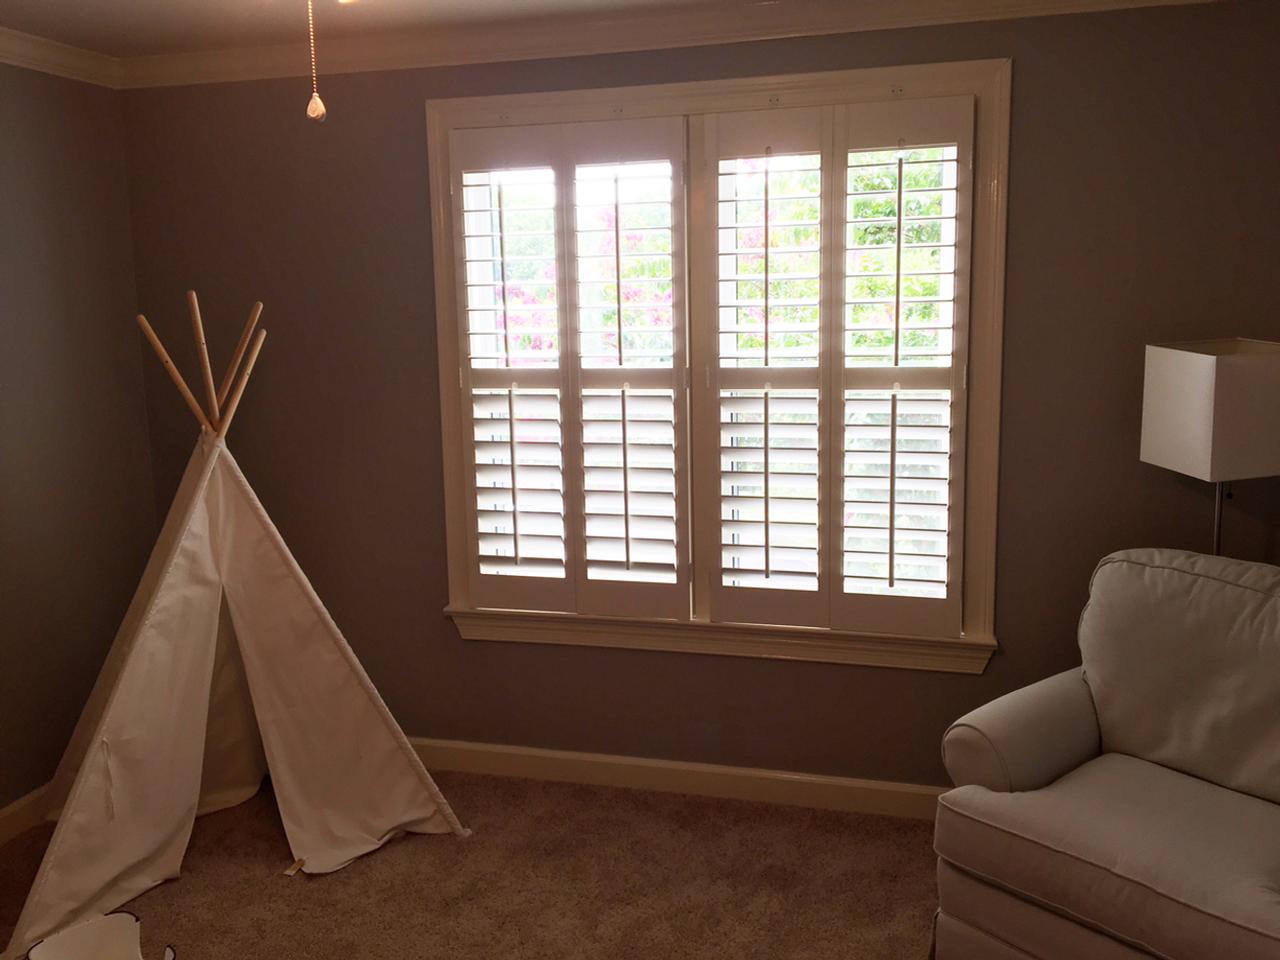 Plantation shutters in a child's bedroom